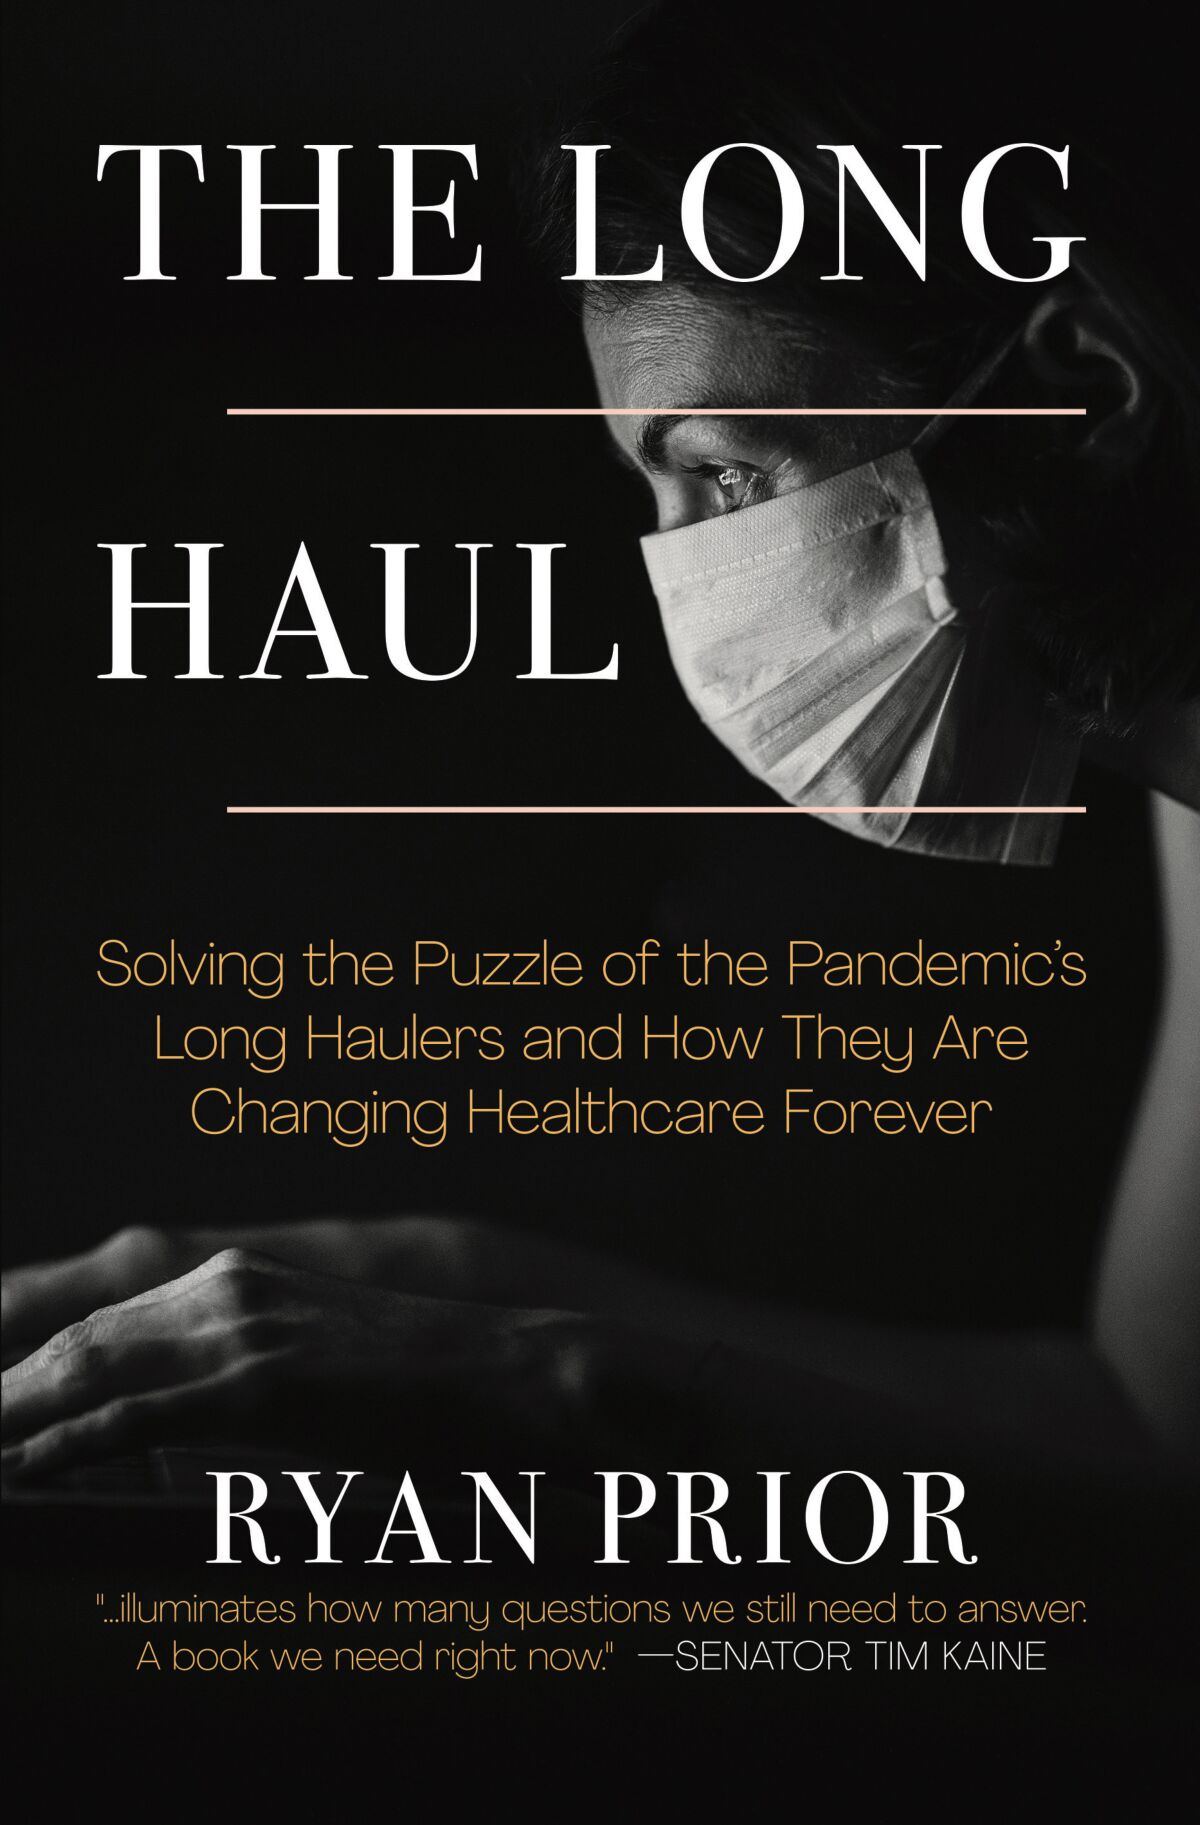 The cover of "the long haul," imagine a person wearing a mask.